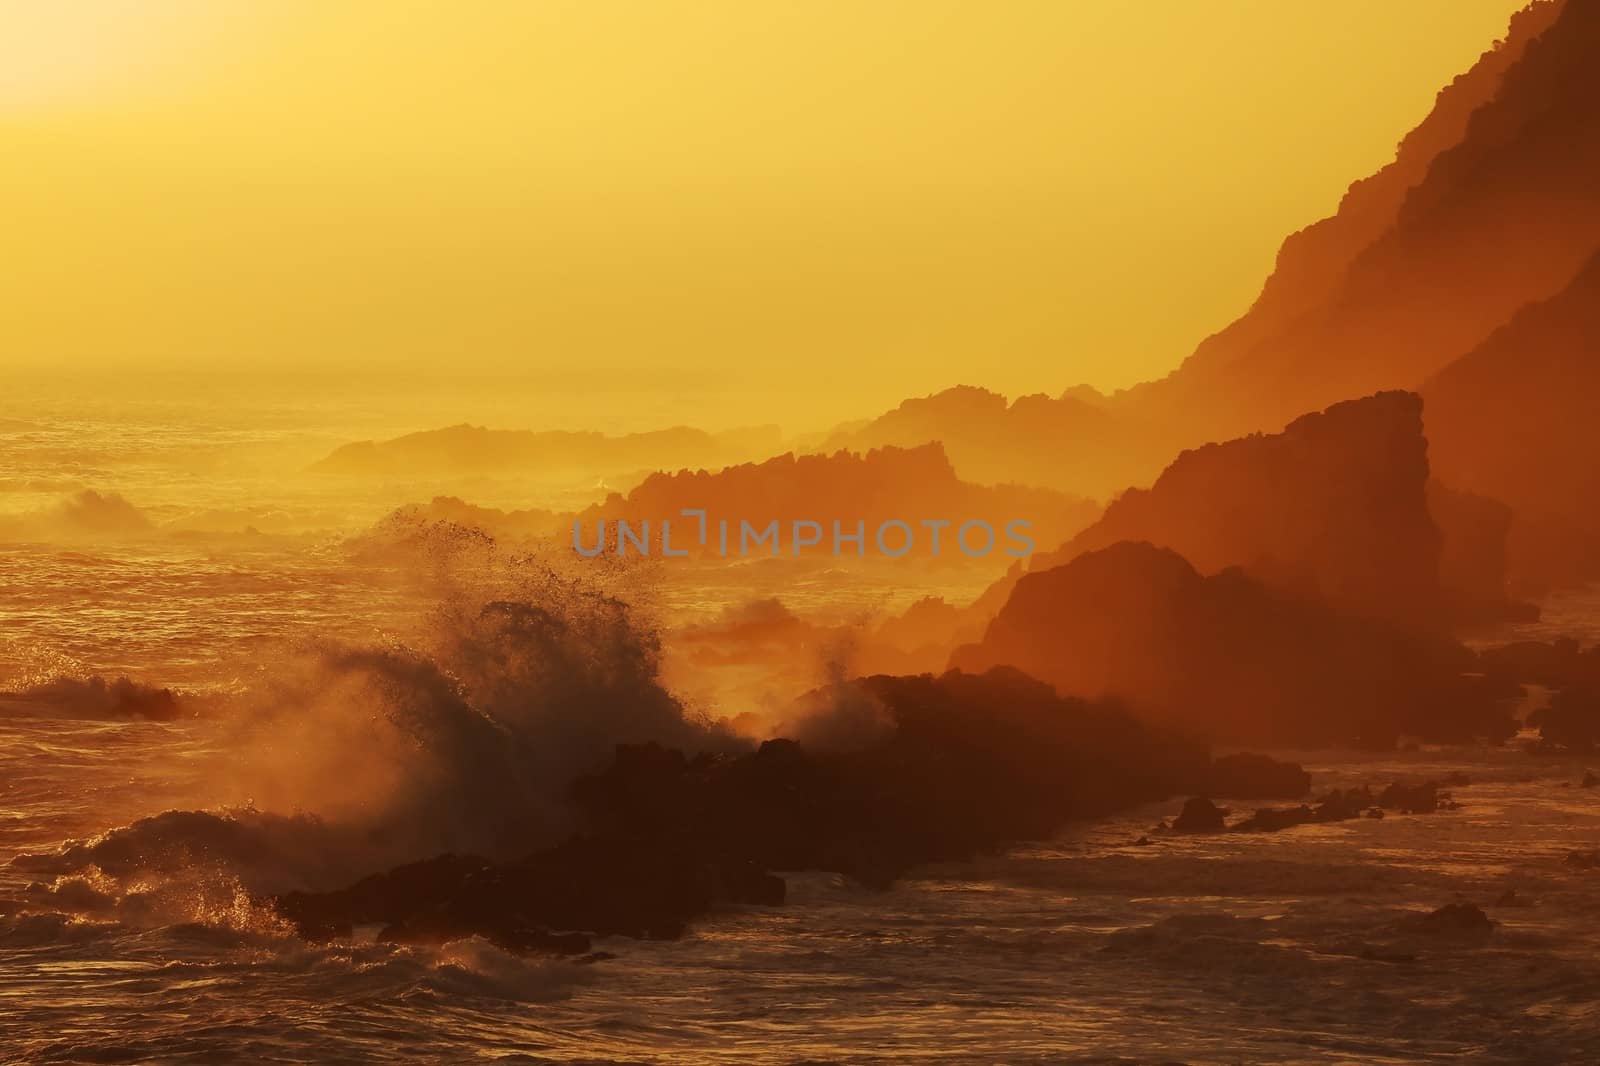 Silhouette outline of the rugged coastline in South Africa at sunset